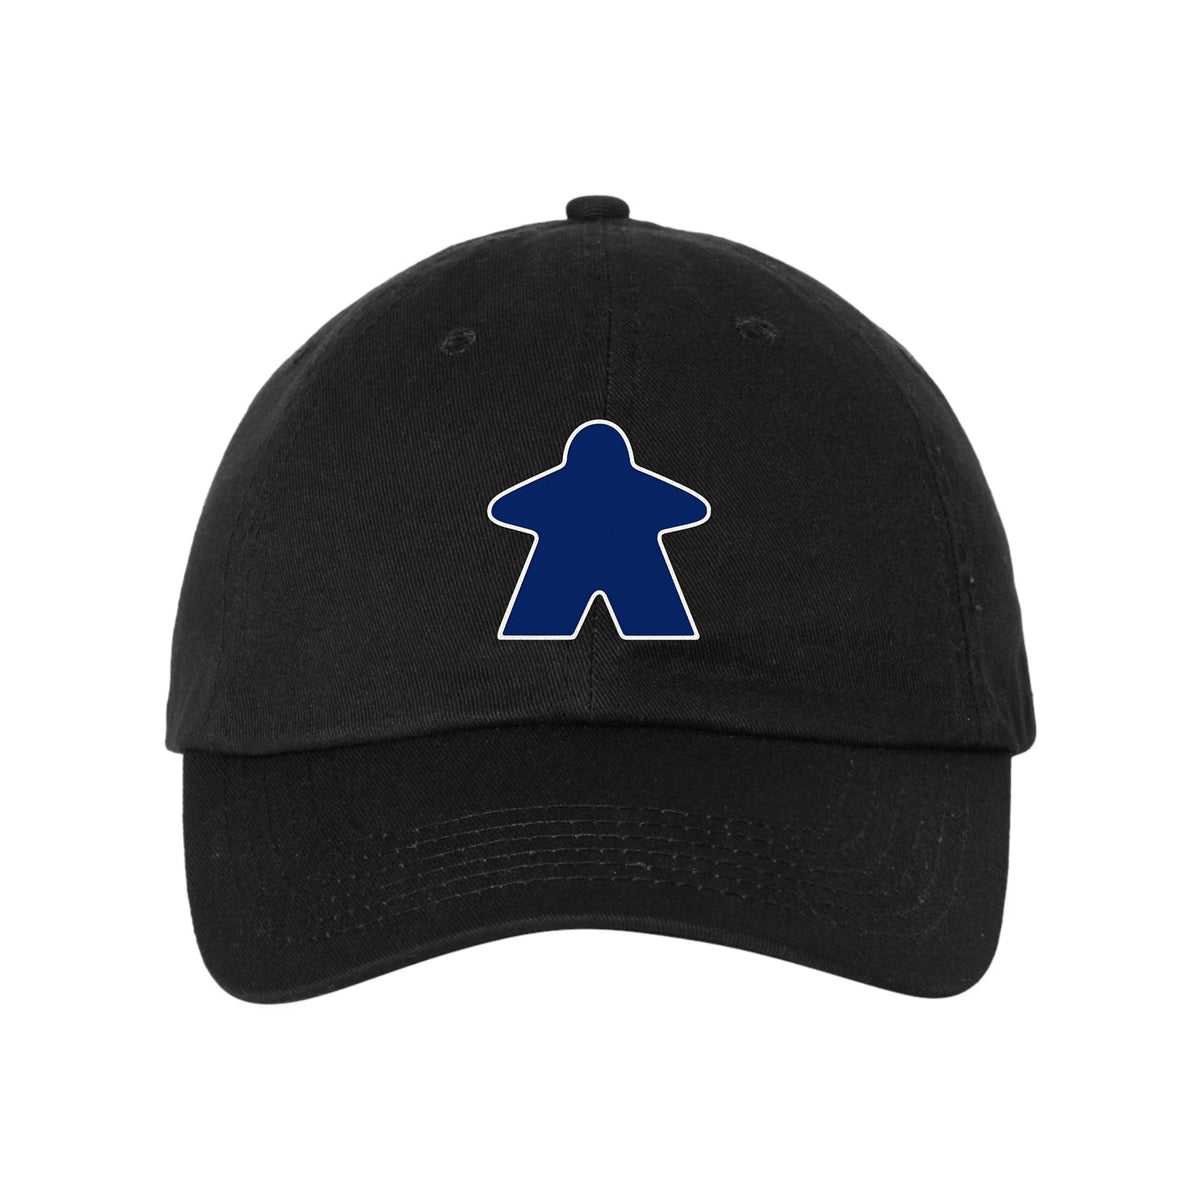 Blue Meeple Board Game Curved Bill Hat